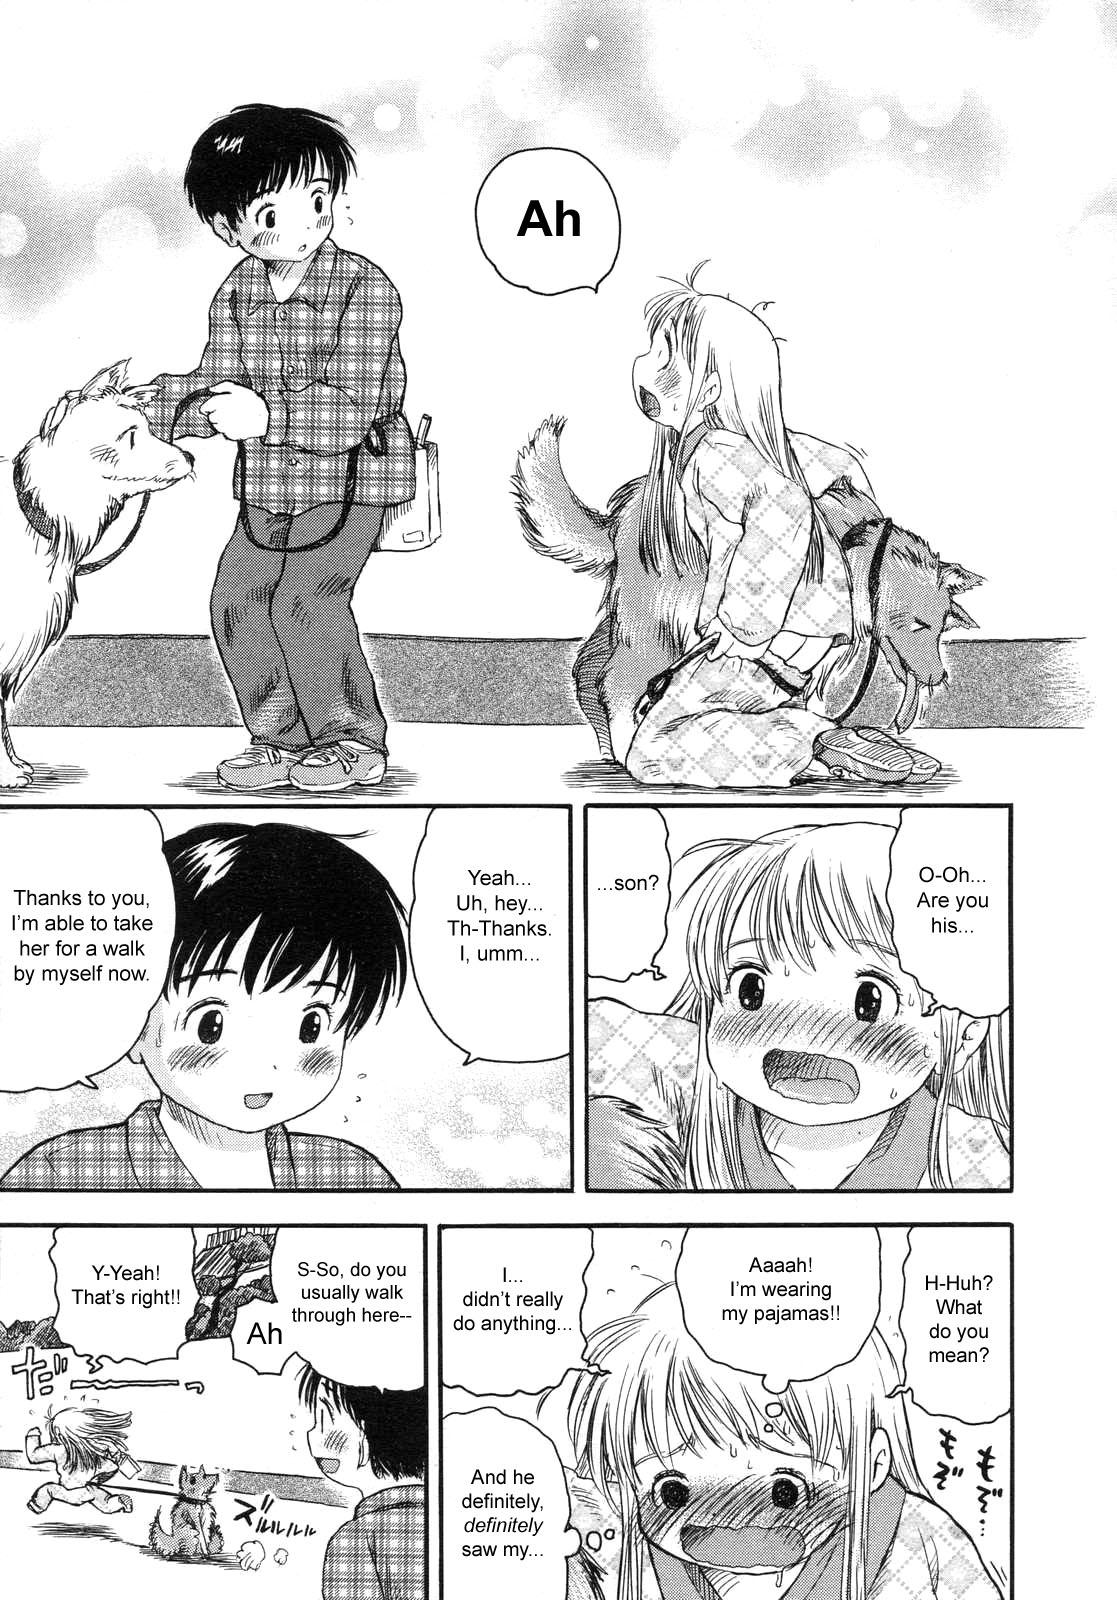 Bus Kongetsu no Wanko. | This Month's Doggy. Family Sex - Page 19